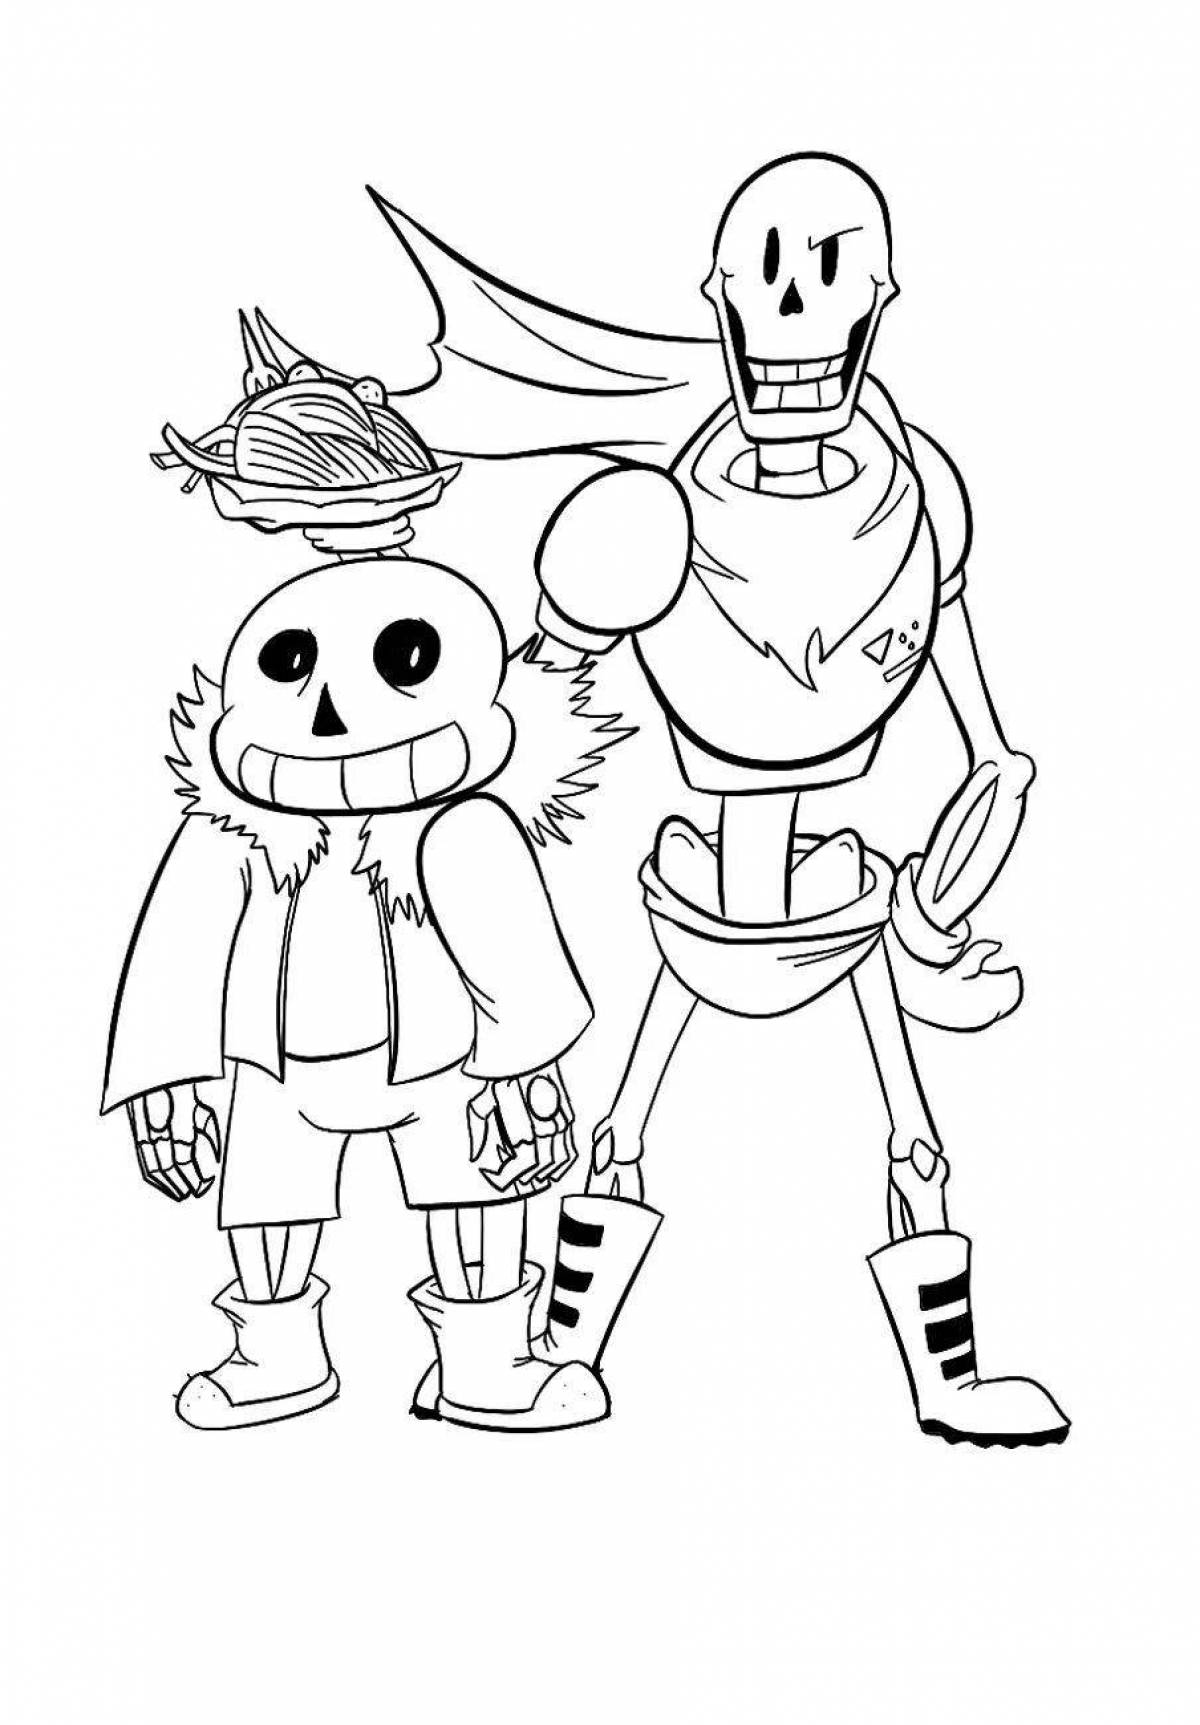 Cute othertale coloring page